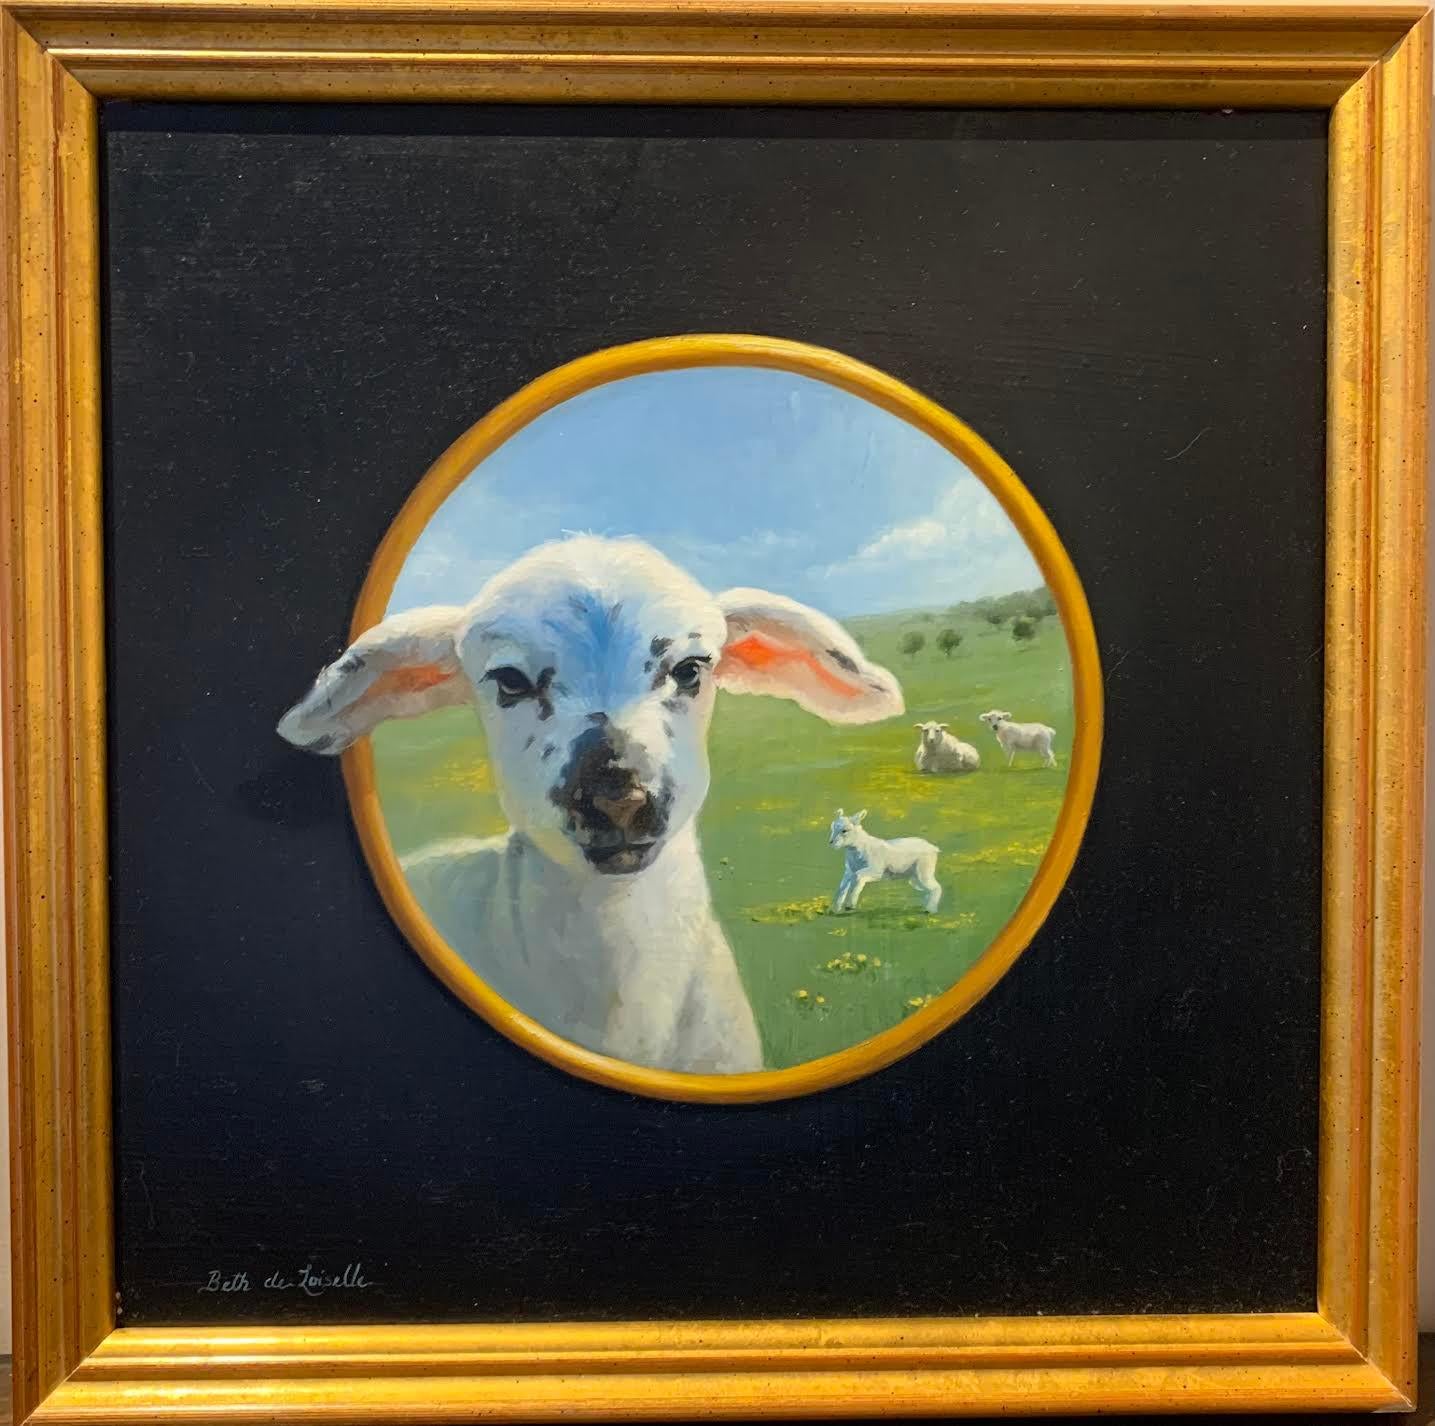 Clever Trompe L'oeil Landscape of Frolicking's Lambs, One About to Jump Through  For Sale 1